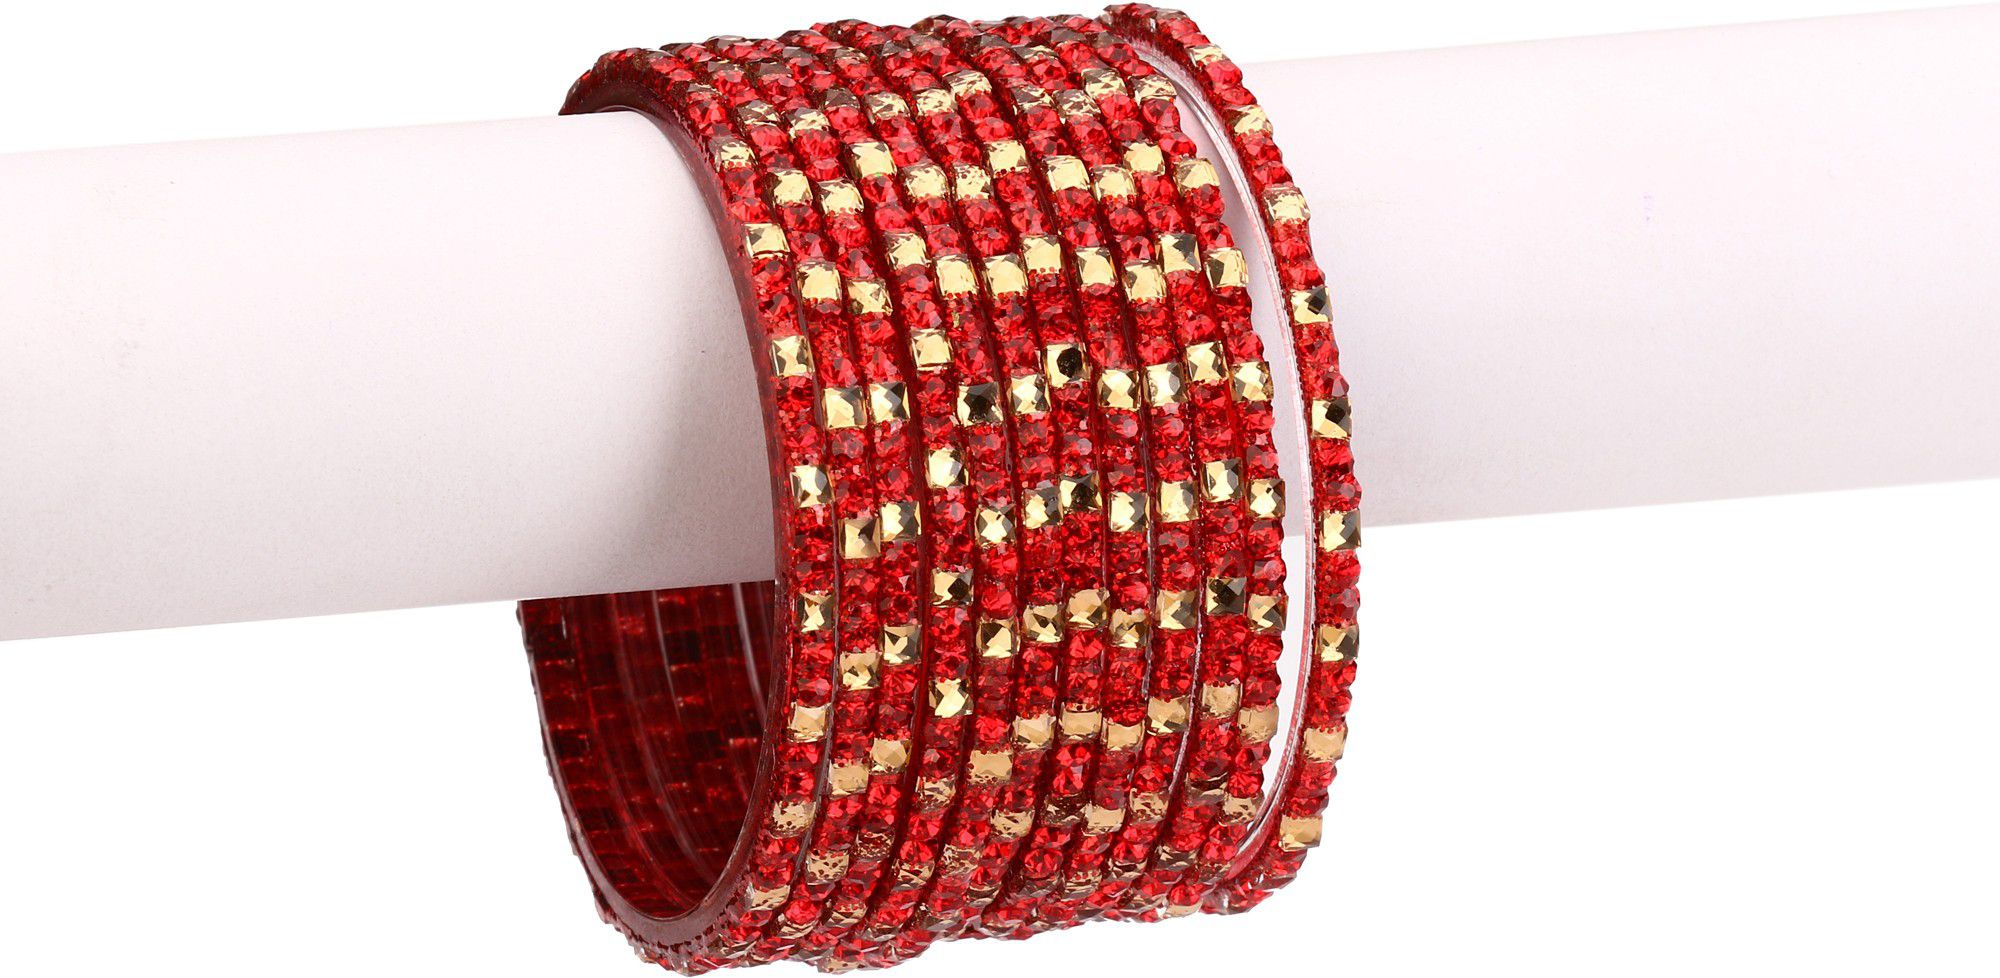     			Somil 12 Firing Red Glass Bangle Party Set Fully Ornamented With Colorful Beads & Crystal With Safety Box-EI_2.8